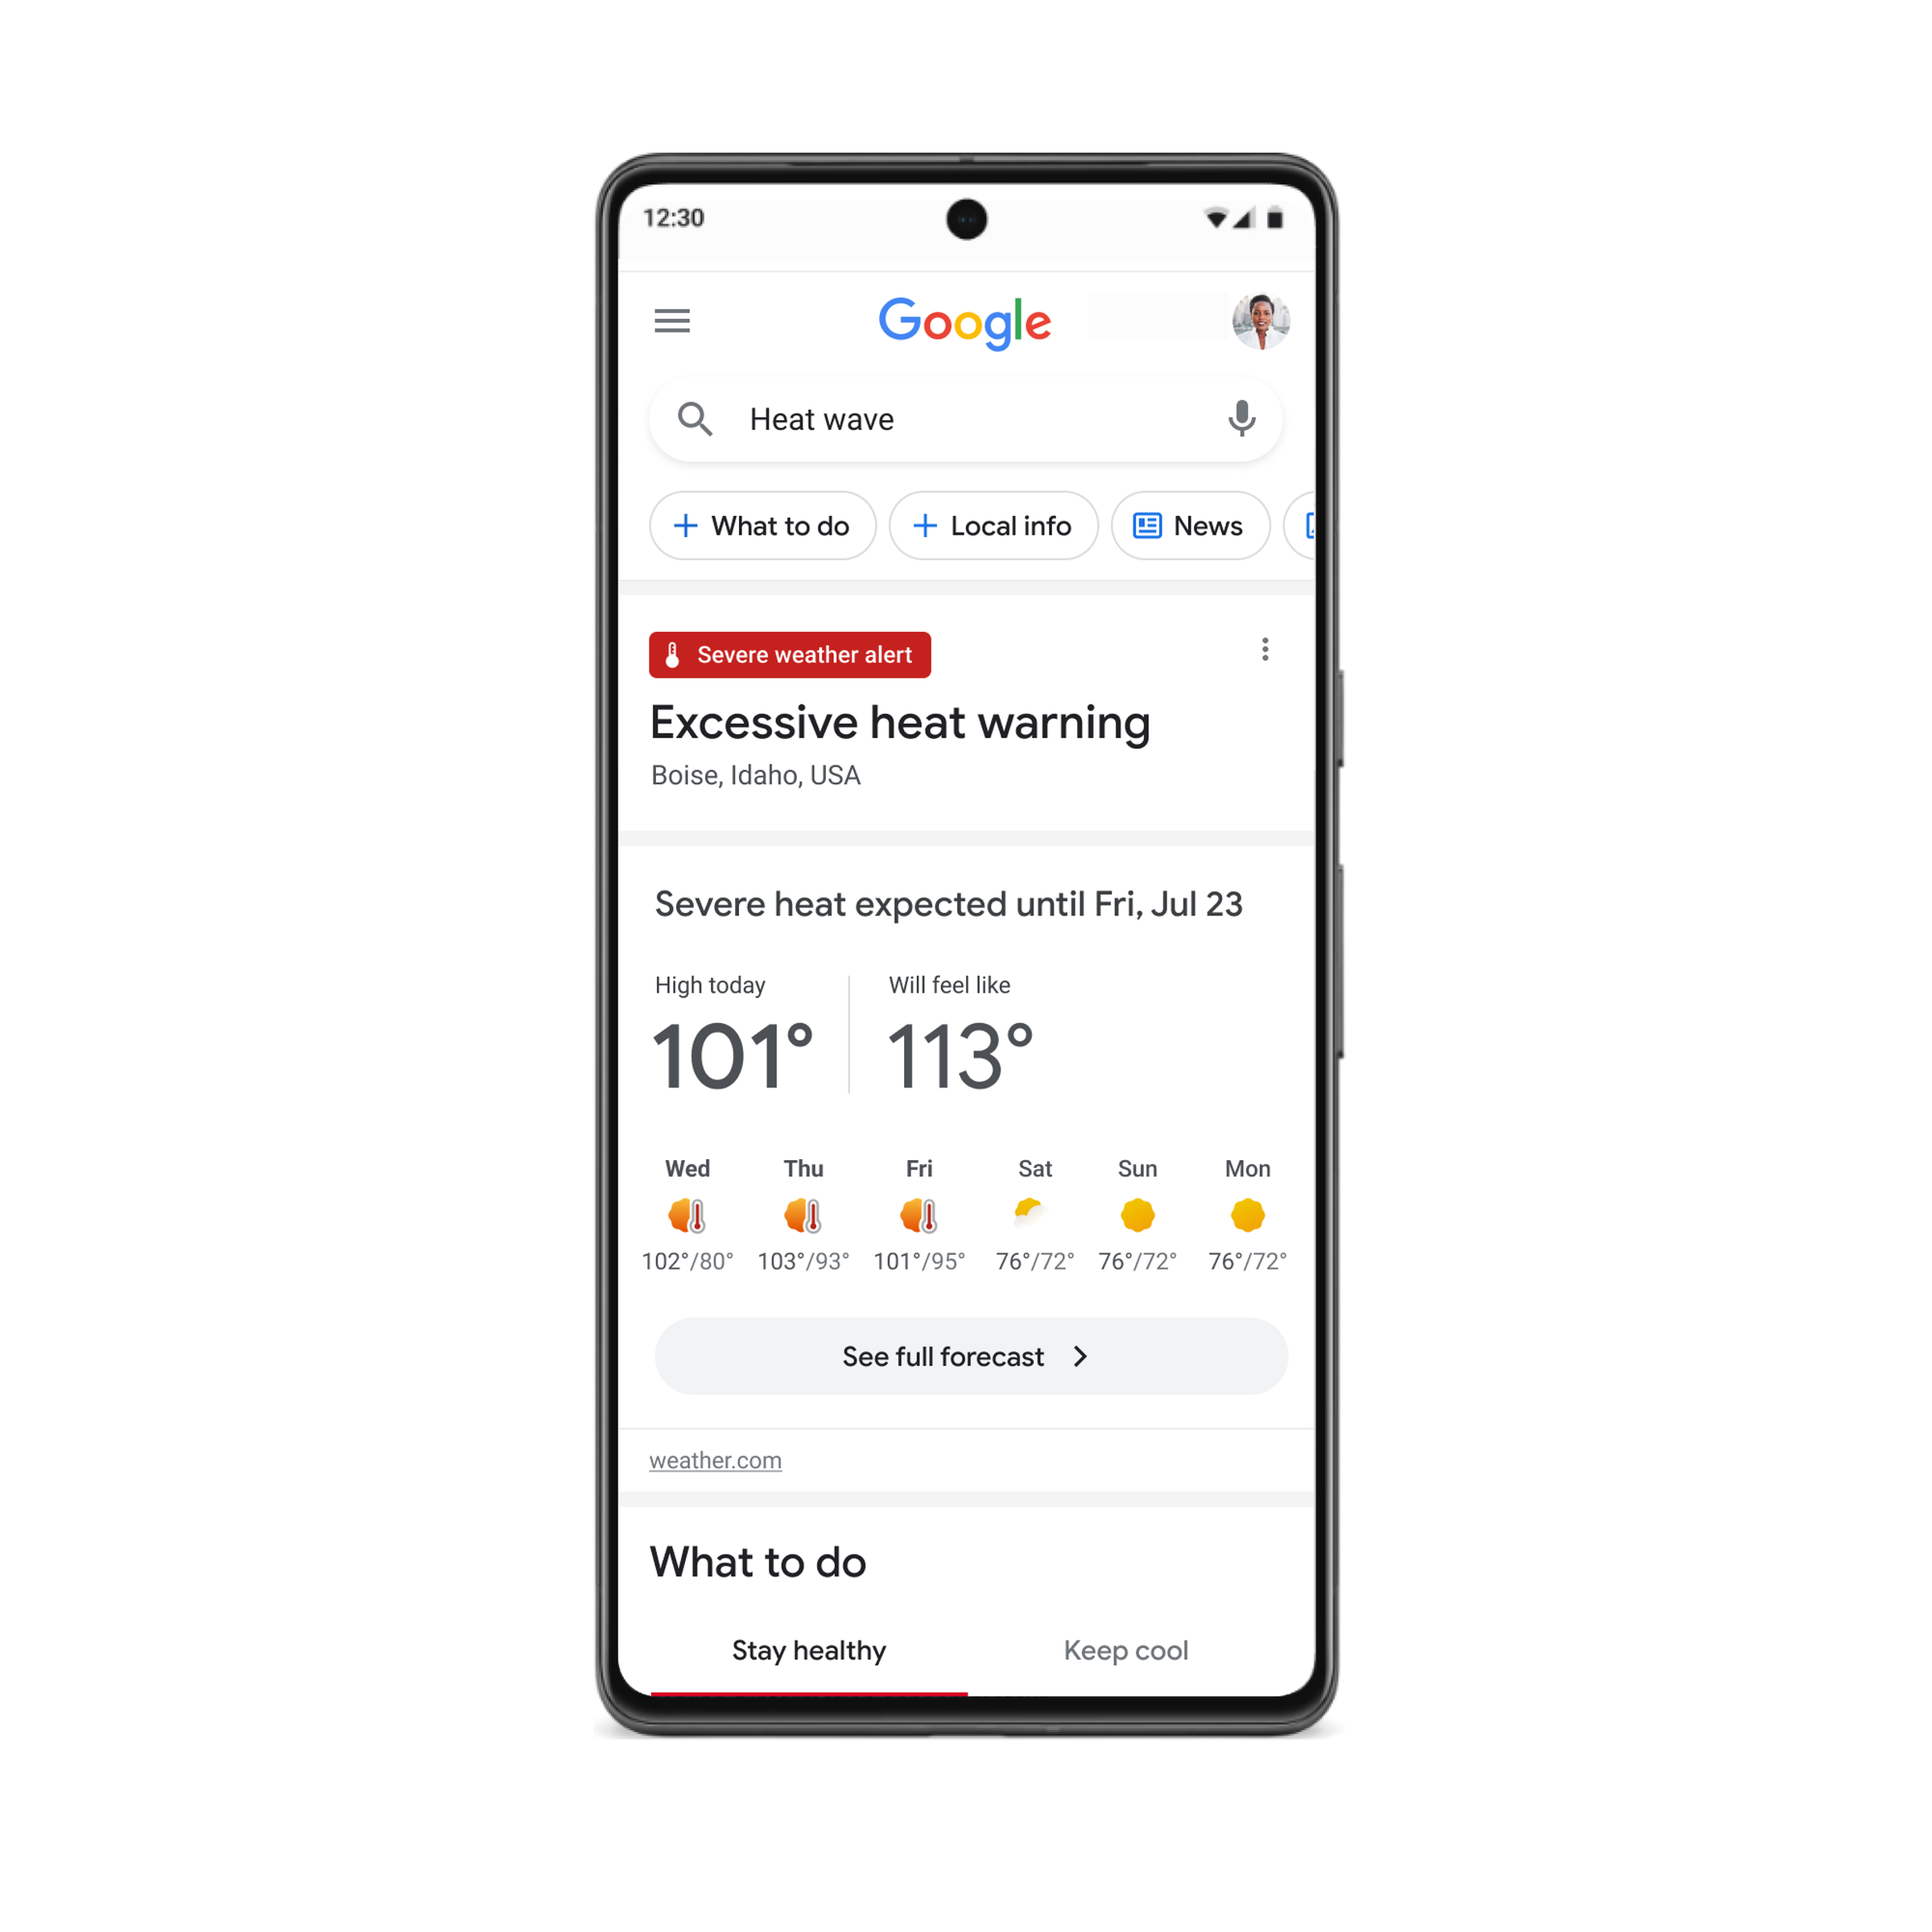 A phone displays the Google Search webpage, with an ‘excessive heat warning’ label at the top and information on the weather forecast below.